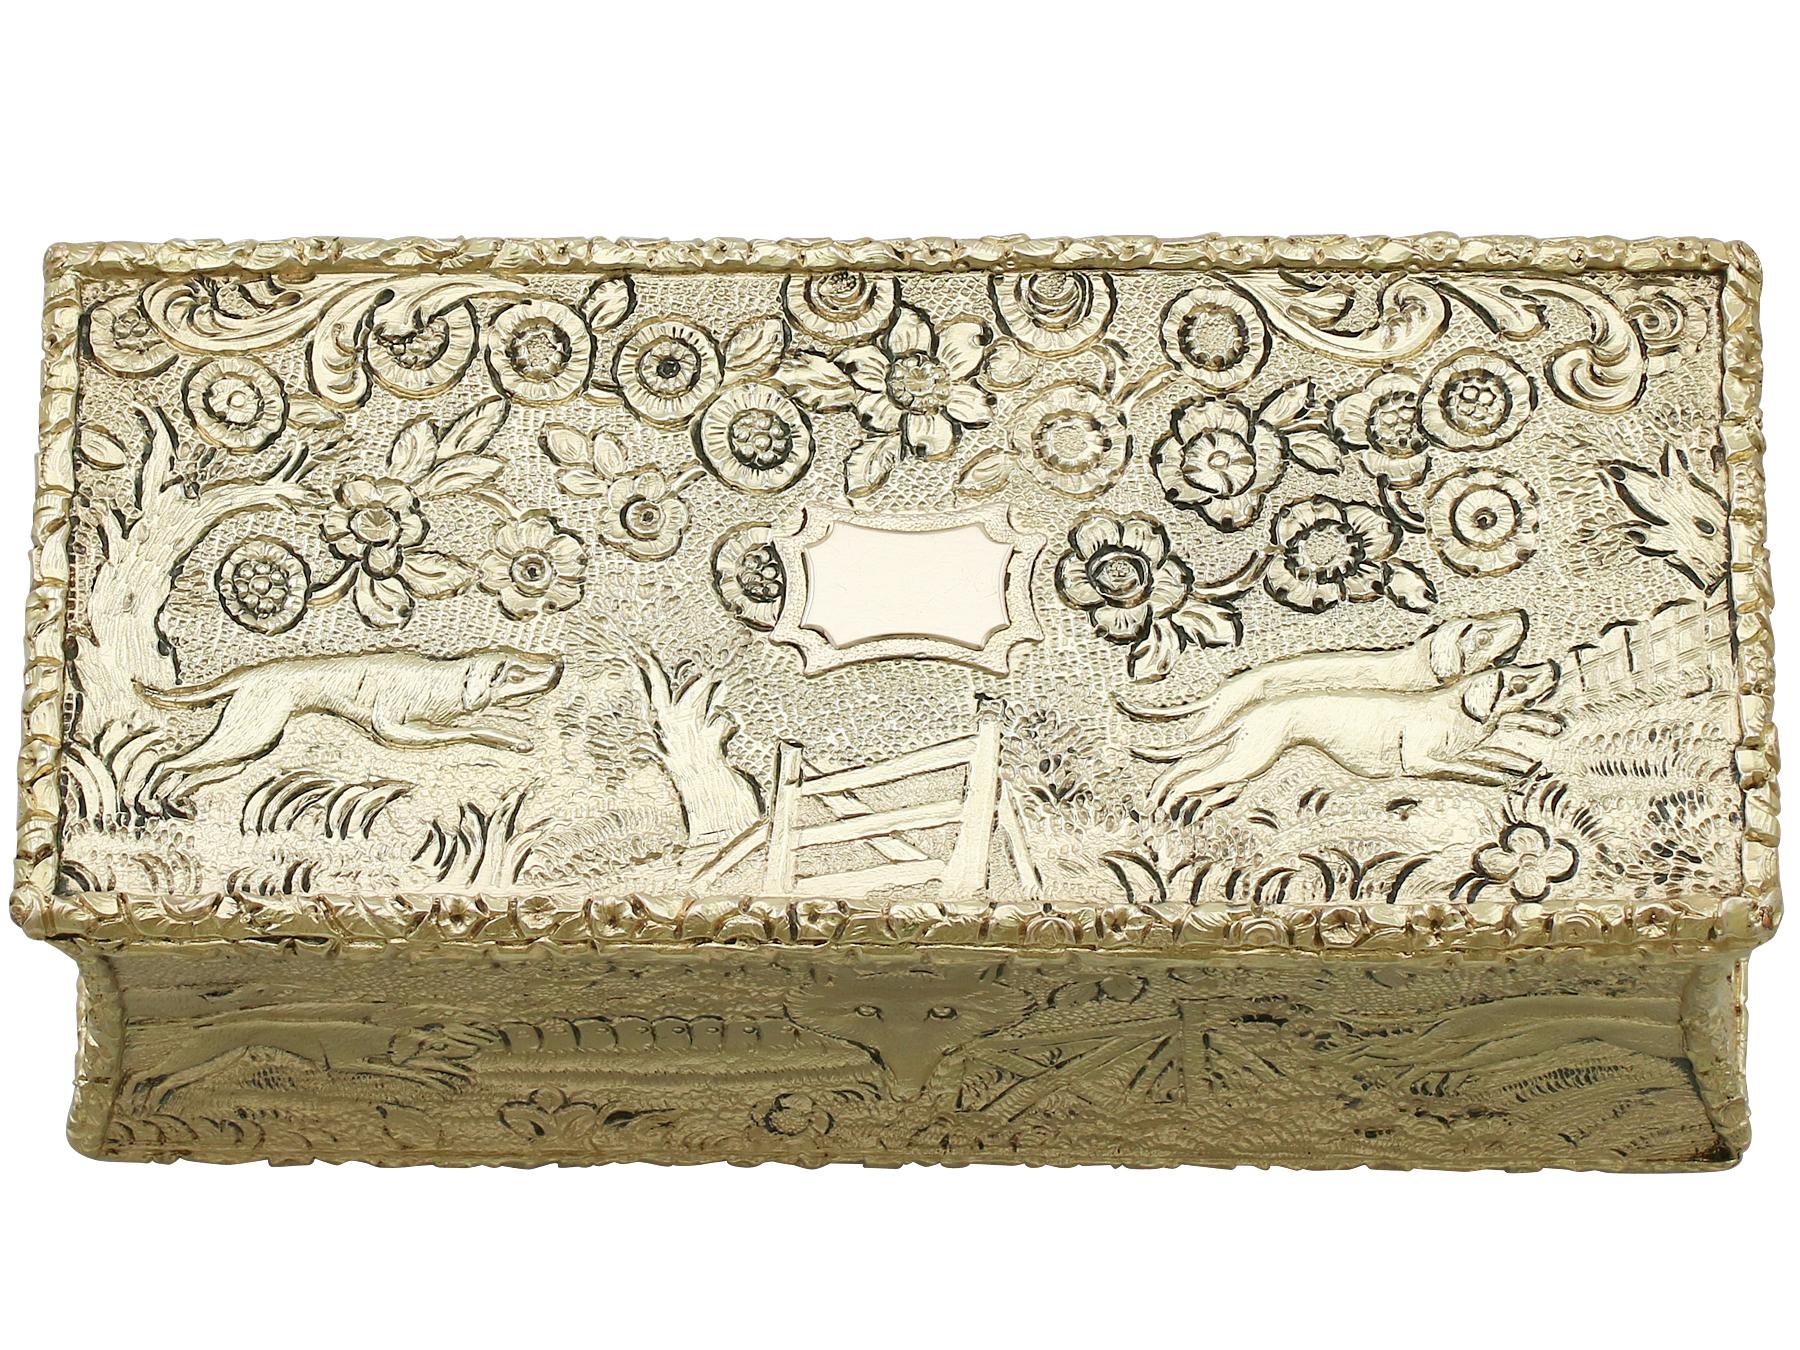 This exceptional antique George IV sterling silver gilt Snuff box has a rectangular waisted form.

The surface of this antique silver box is embellished with exceptional chased decoration depicting hunting hounds chasing a fox in an rural